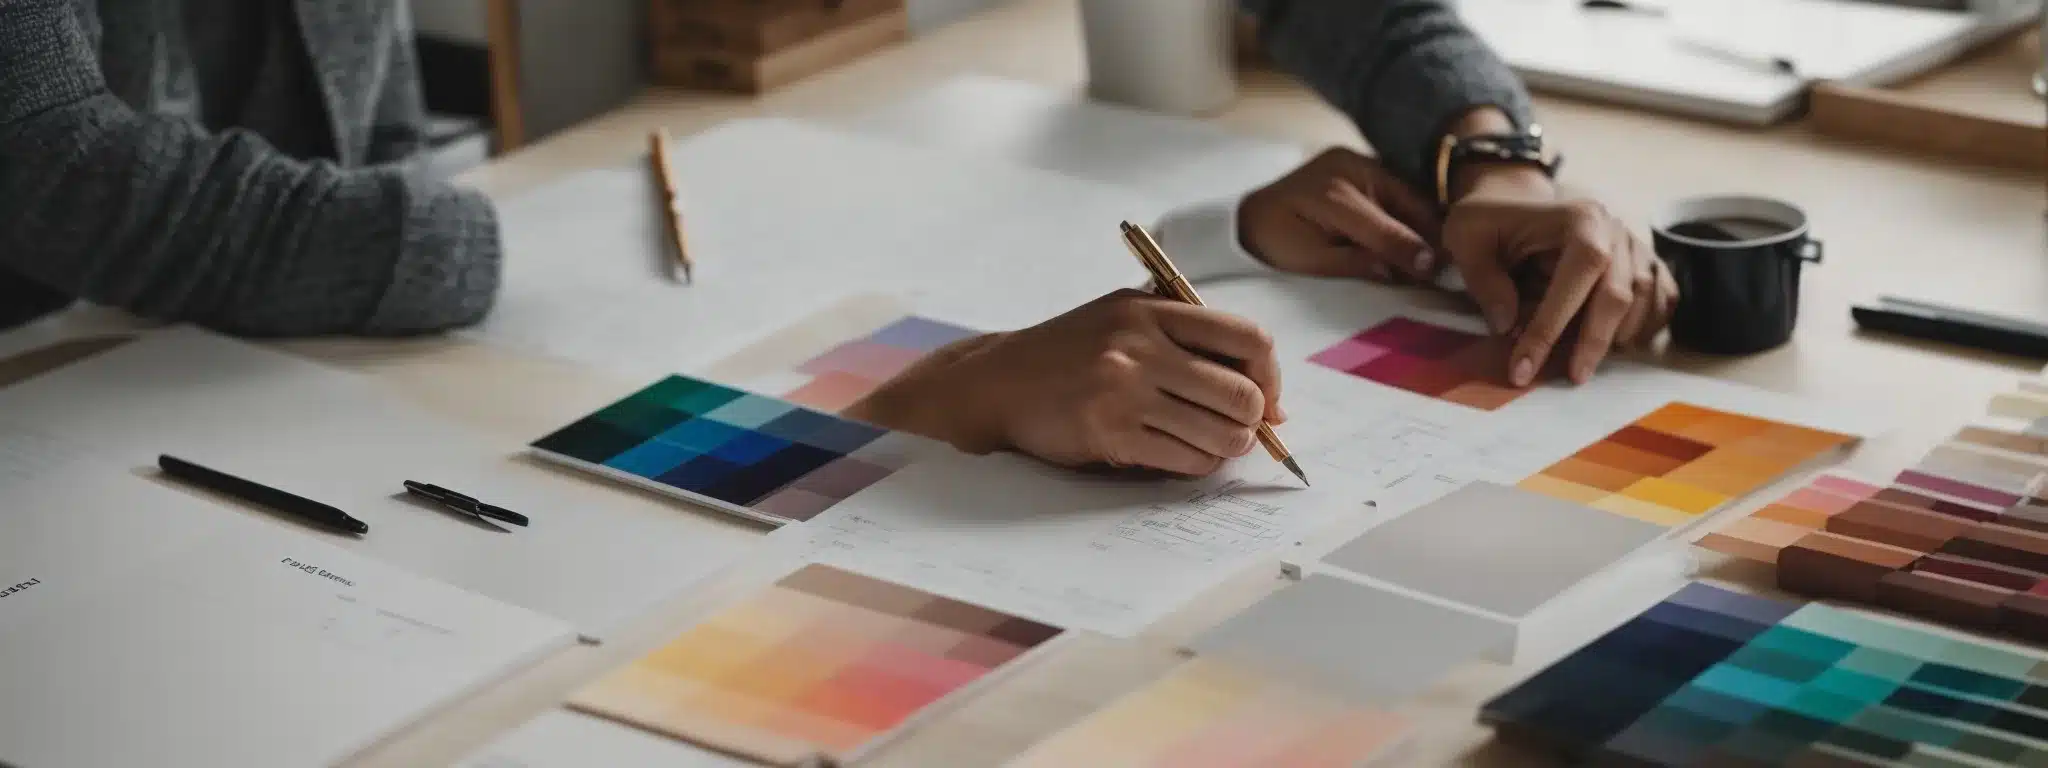 A Designer Thoughtfully Sketches A Logo On A Clean, Well-Lit Workspace, Surrounded By Color Swatches And Minimalist Mood Boards.